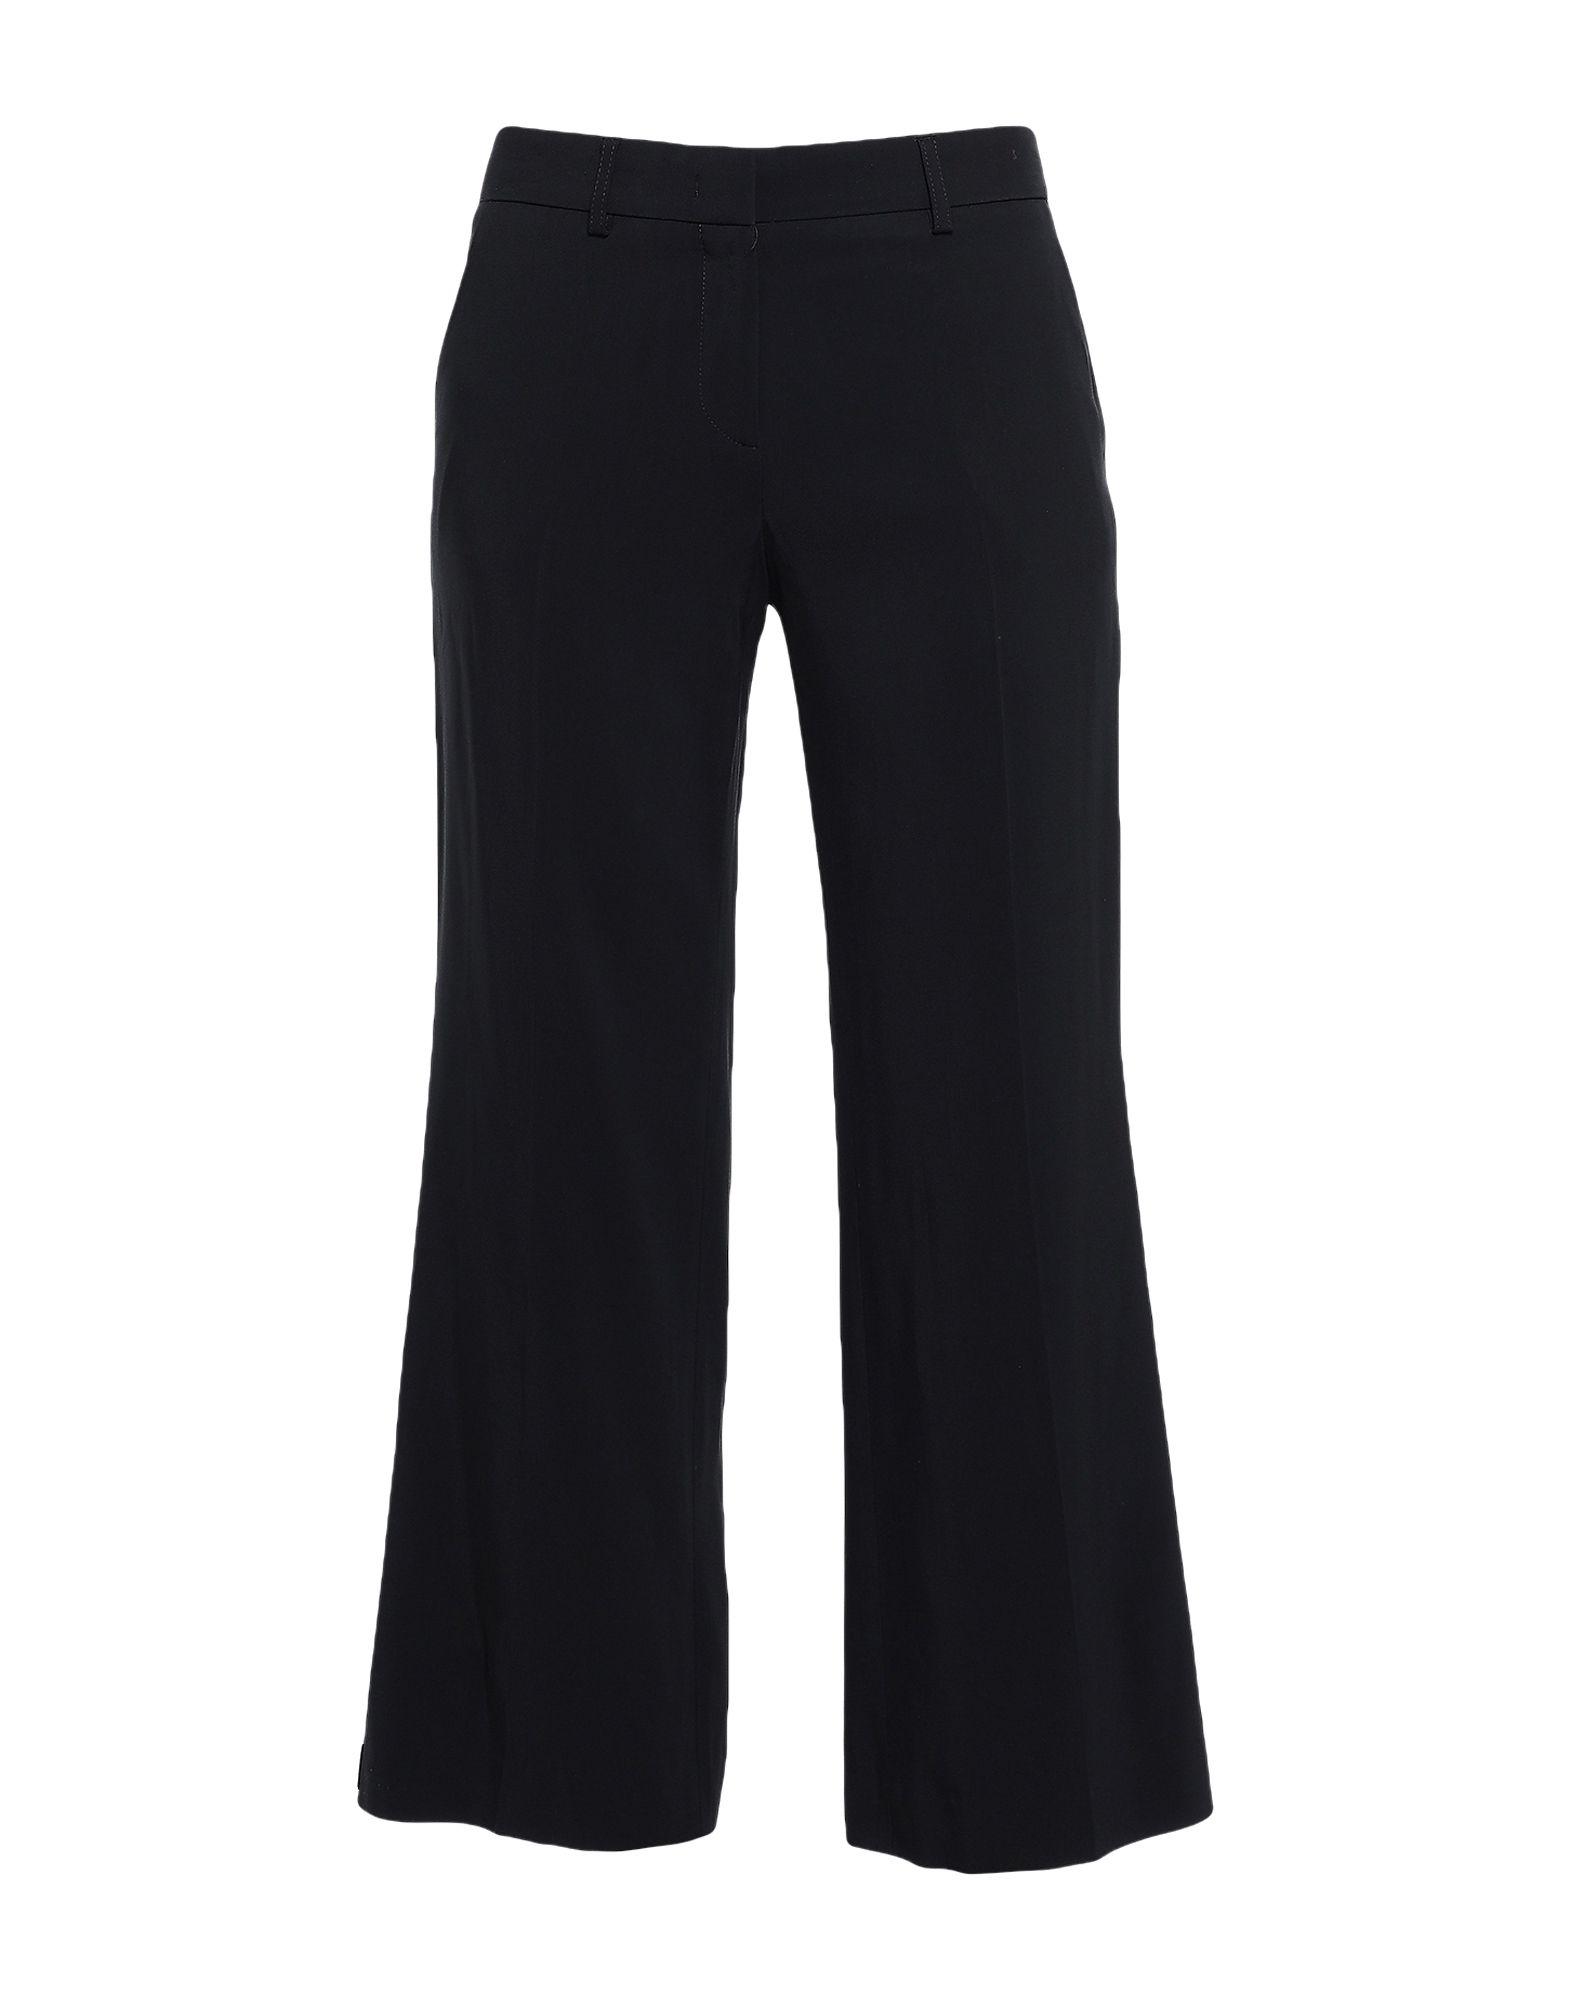 Emilio Pucci Synthetic Casual Pants in Black - Lyst